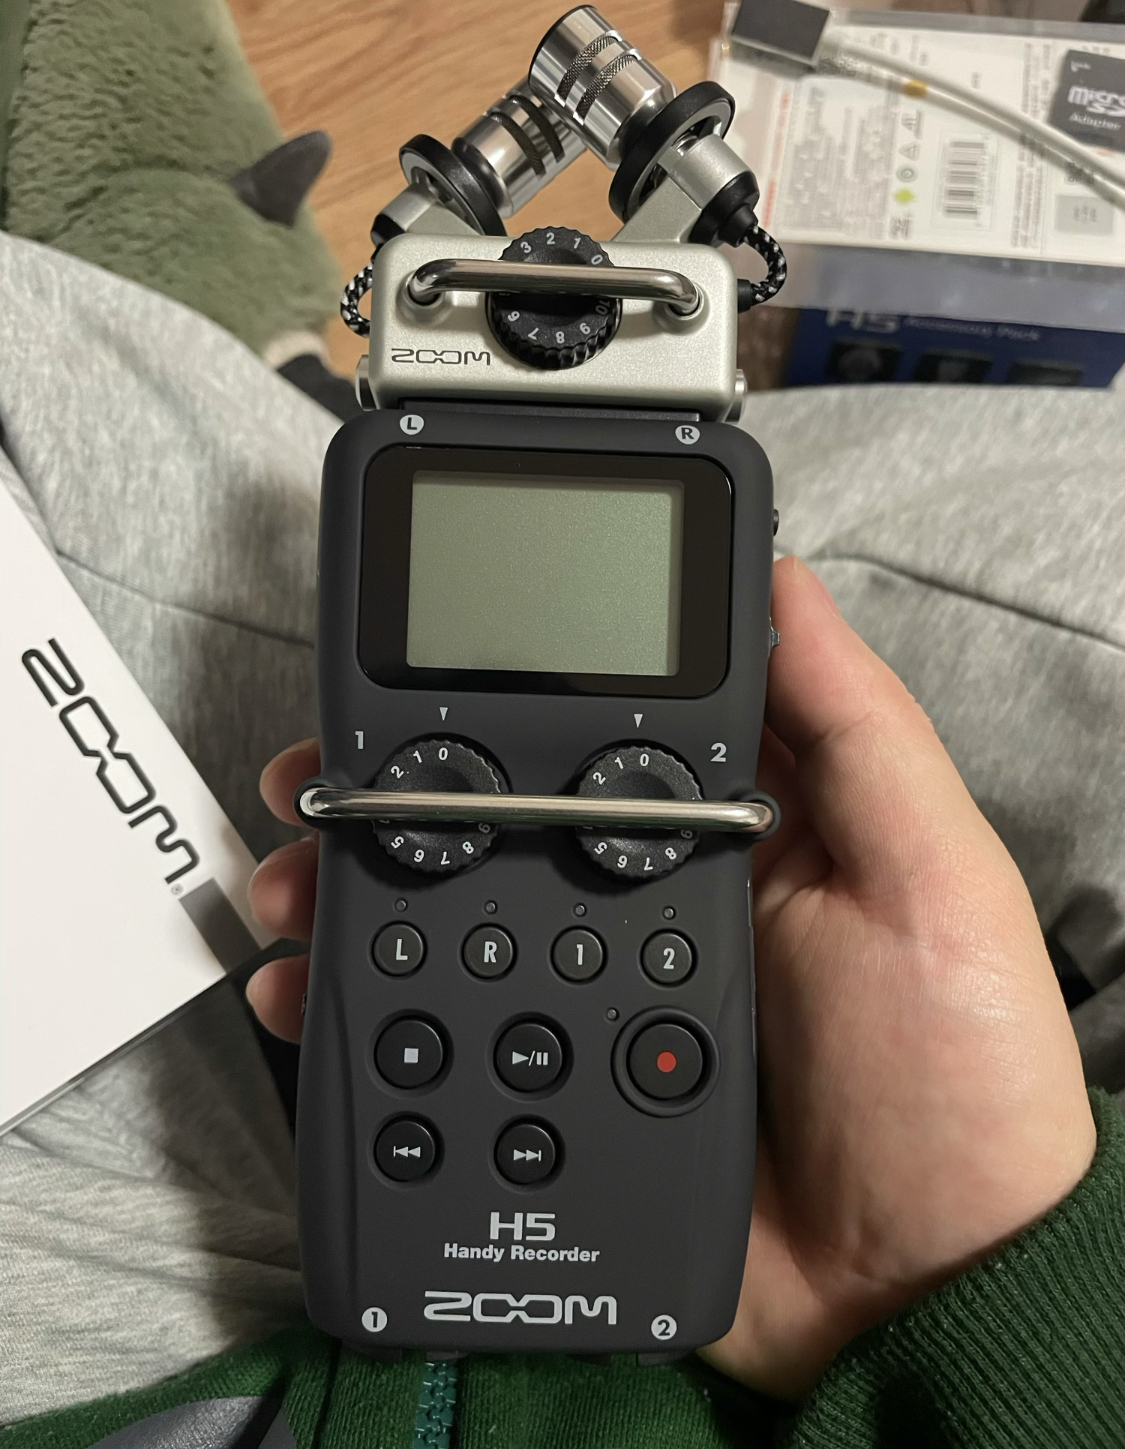 The recording device is a Zoom H5